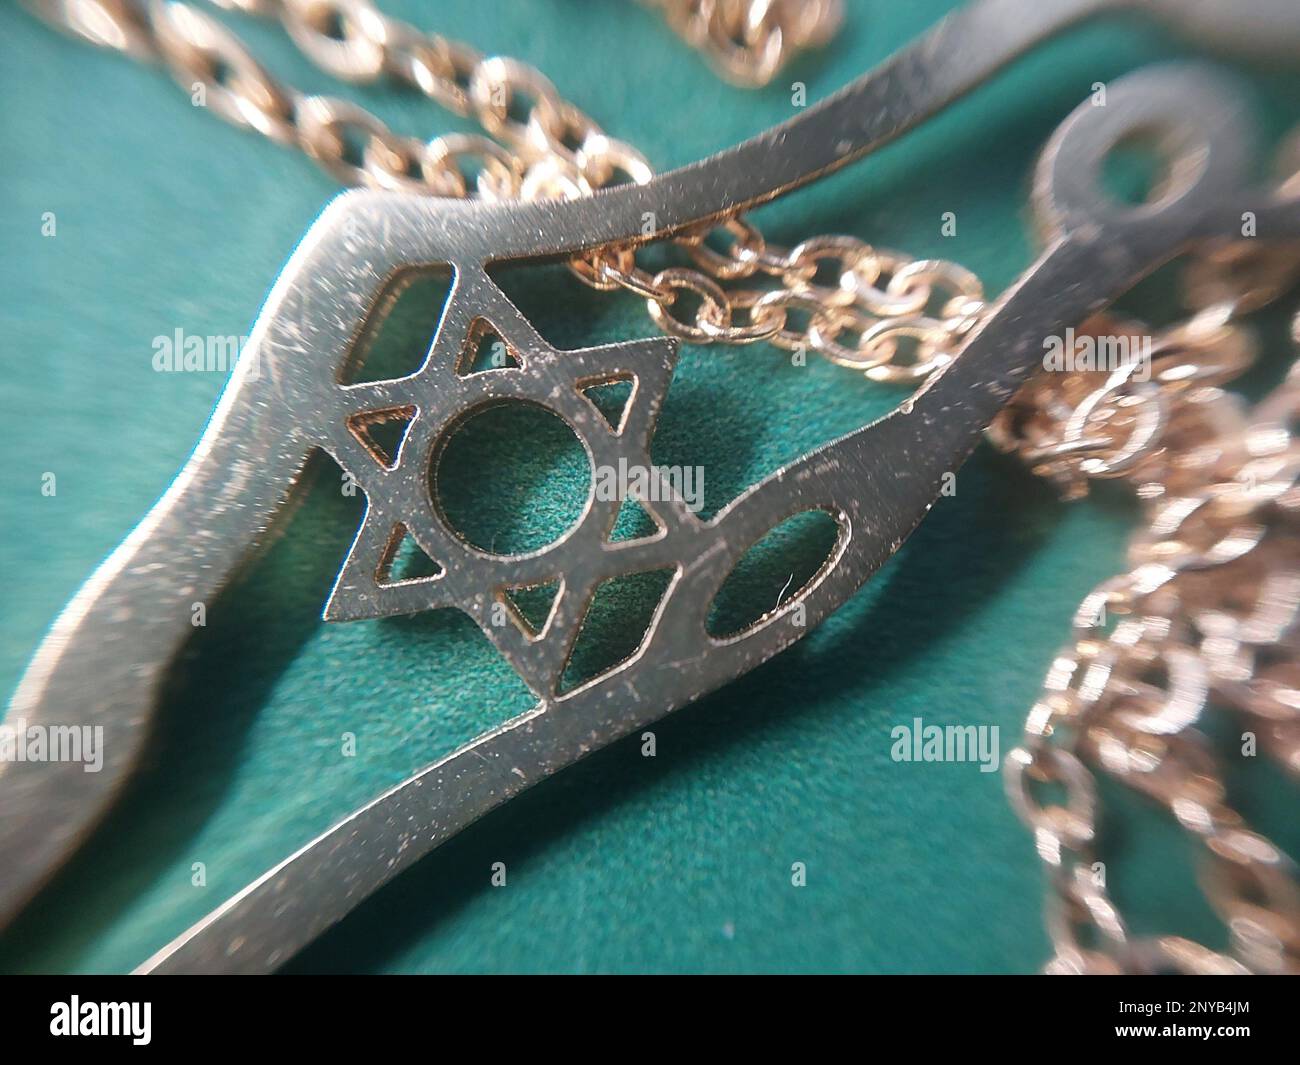 Details of the symbols of the world religions of the peoples of a the world. Stock Photo